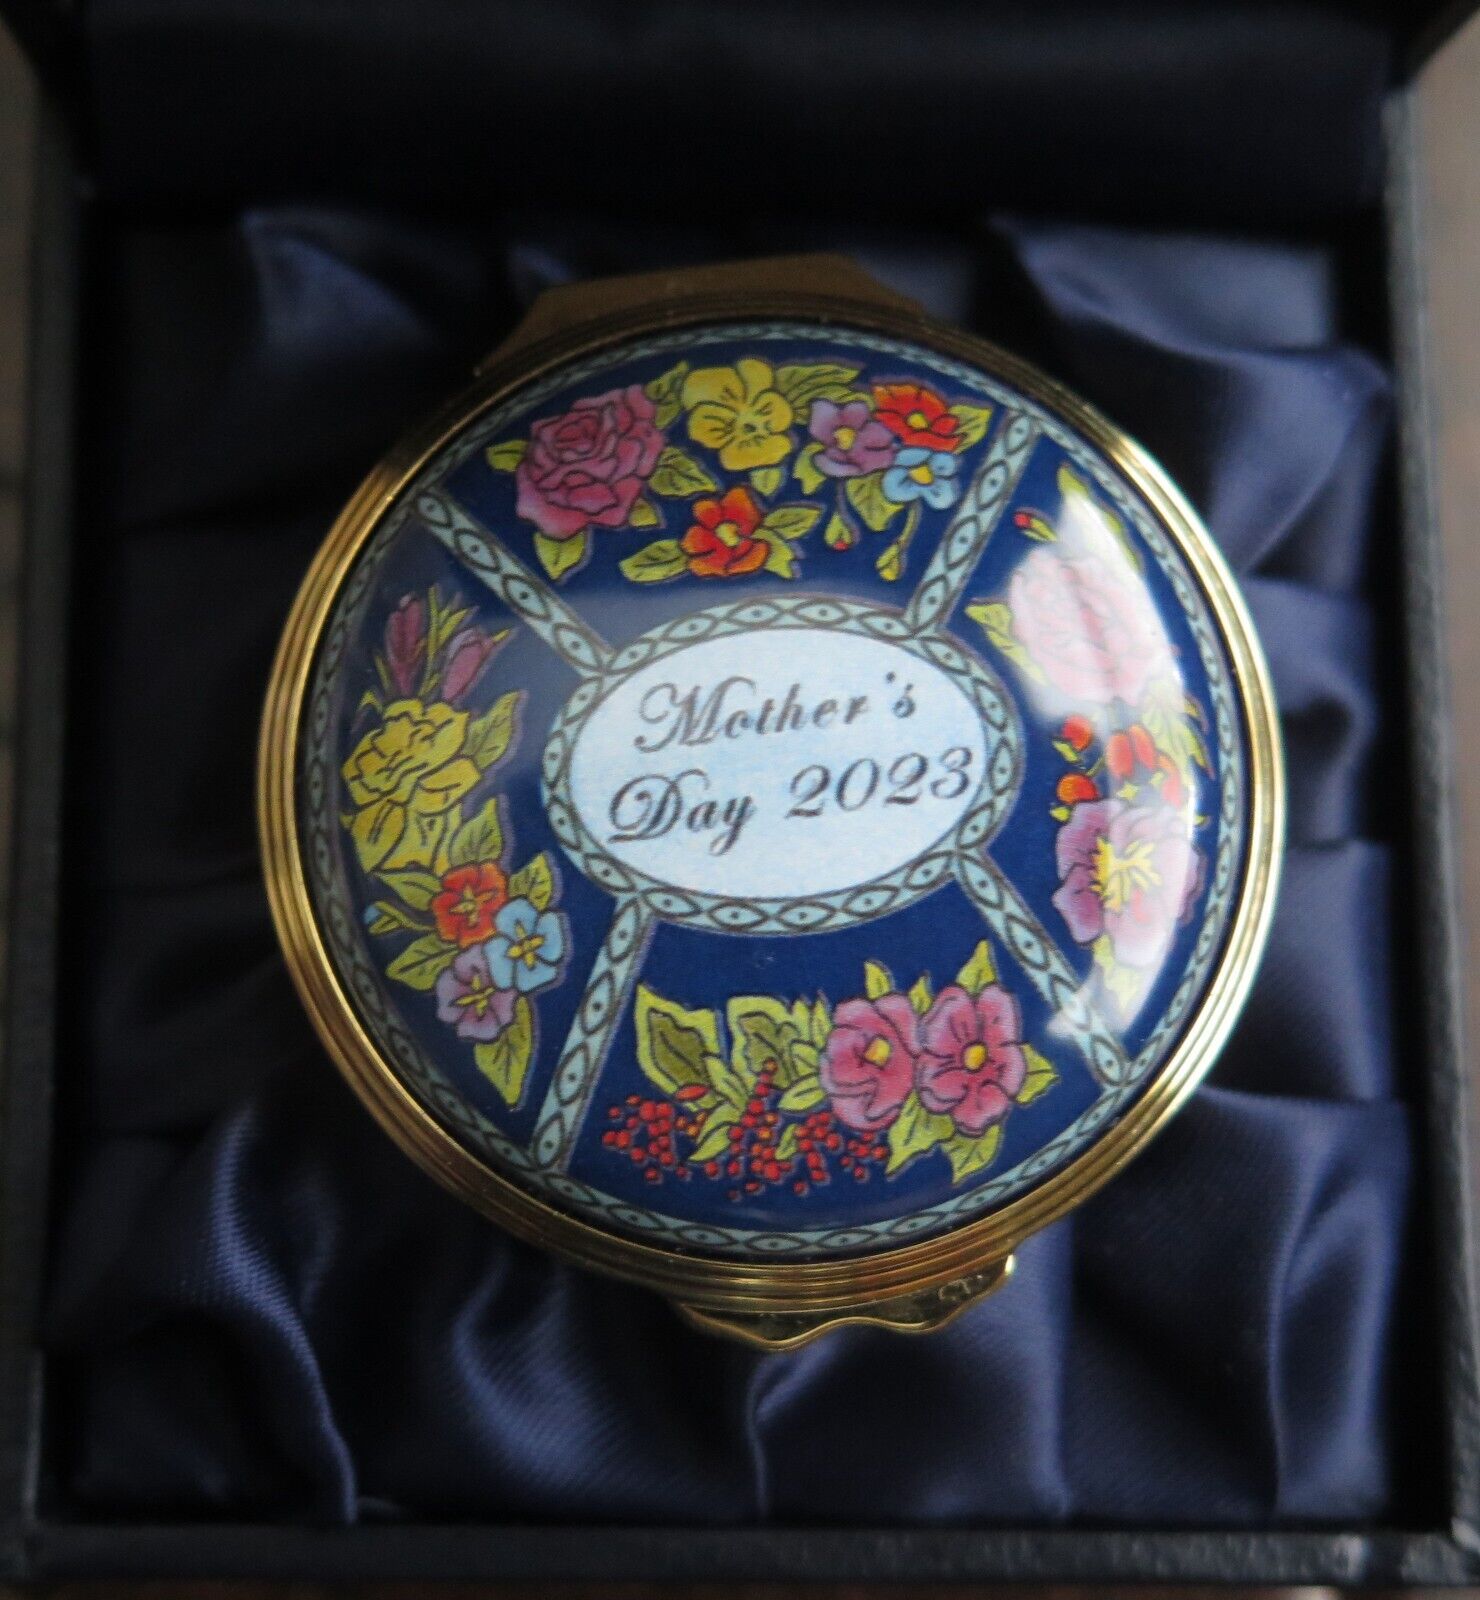 New HALCYON DAYS Enameled onto Copper England Mother's Day 2023 Trinket Box $345